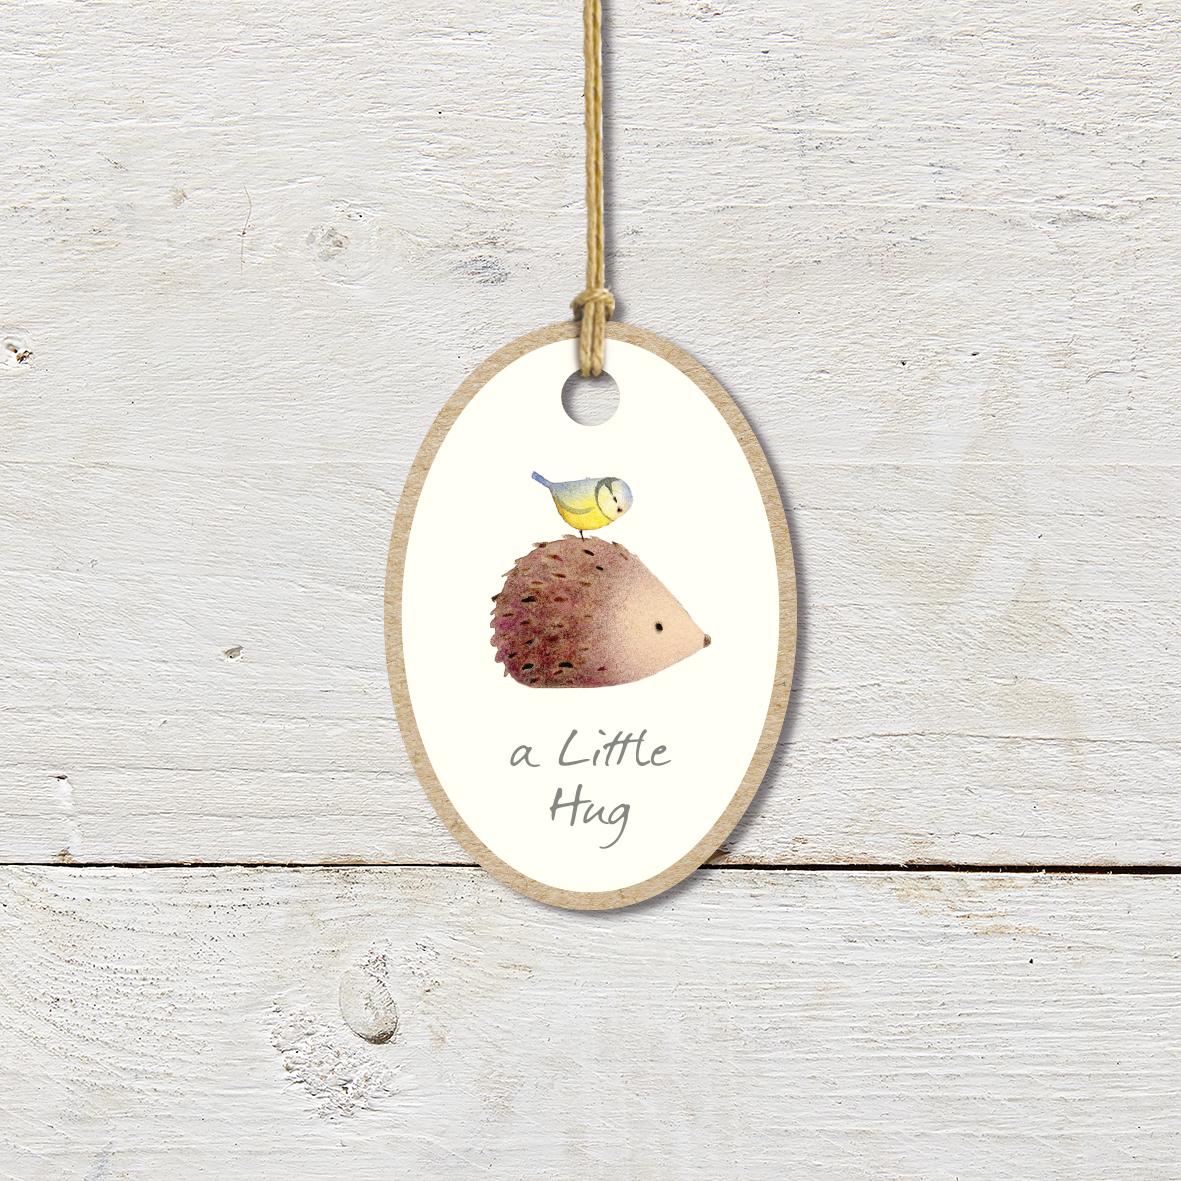 Small Wooden Keepsake Plaque/Tag featuring a cute hedgehog and blue tit with a ’A Little Hug’ caption.